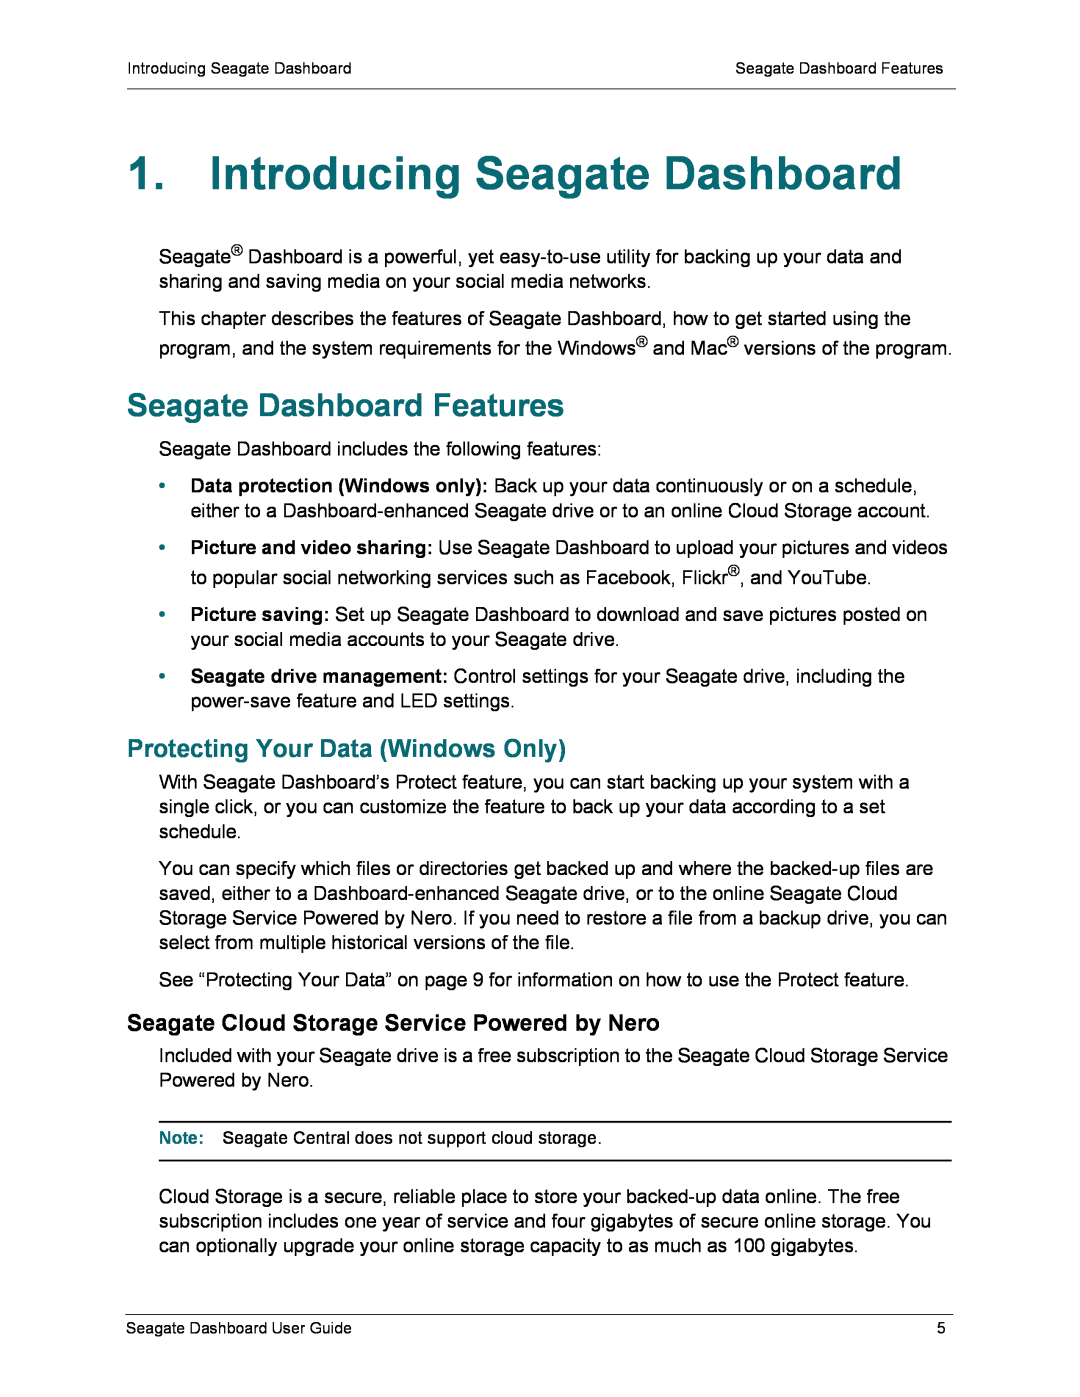 Seagate STCA4000100 manual Introducing Seagate Dashboard, Seagate Dashboard Features, Protecting Your Data Windows Only 